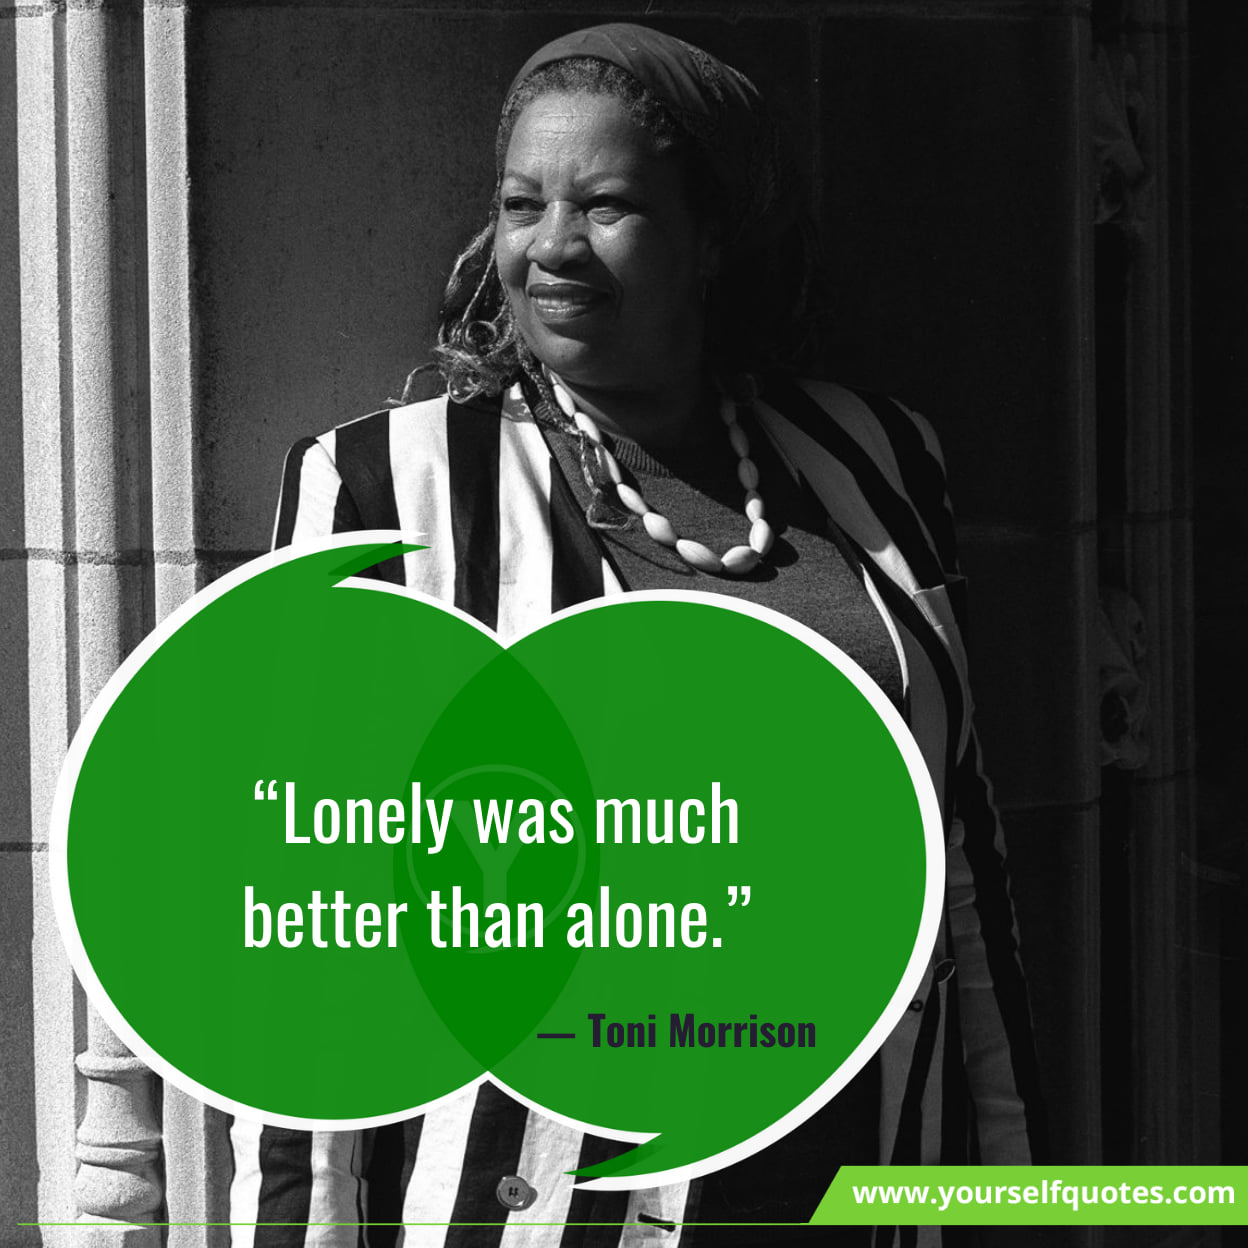 Toni Morrison Quotes About Loneliness